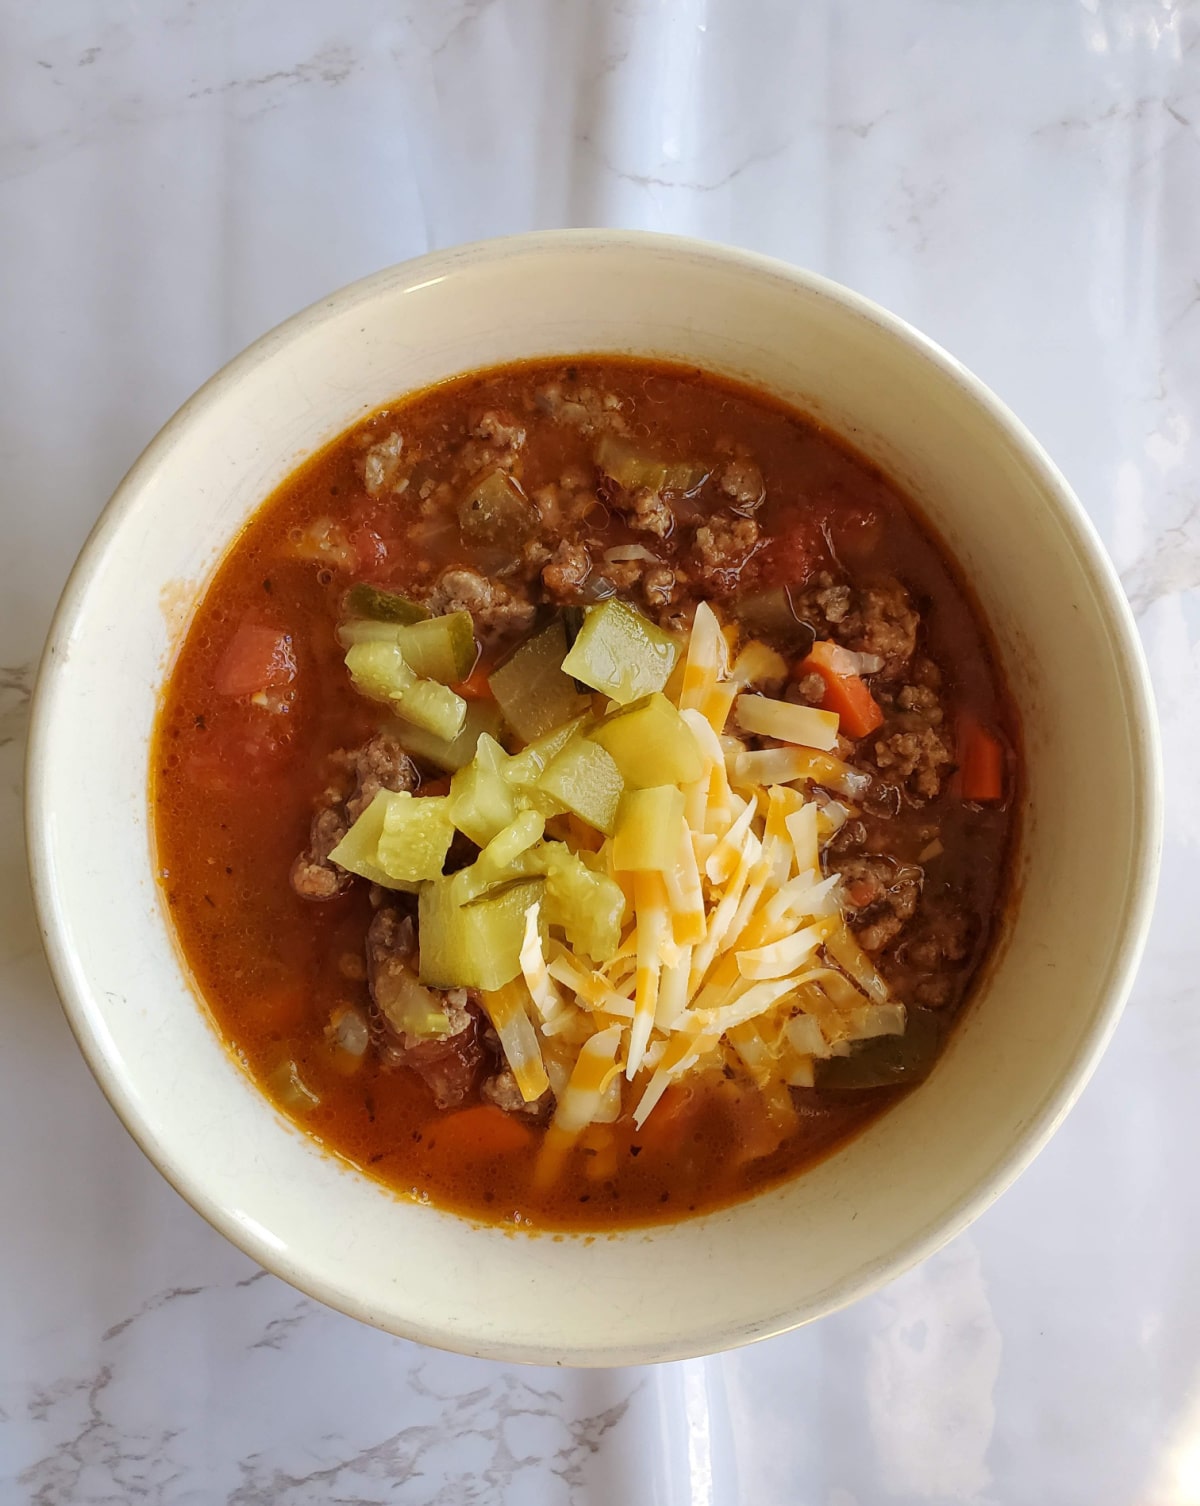 A bowl of hamburger vegetable soup garnished with chopped pickles and shredded cheese.